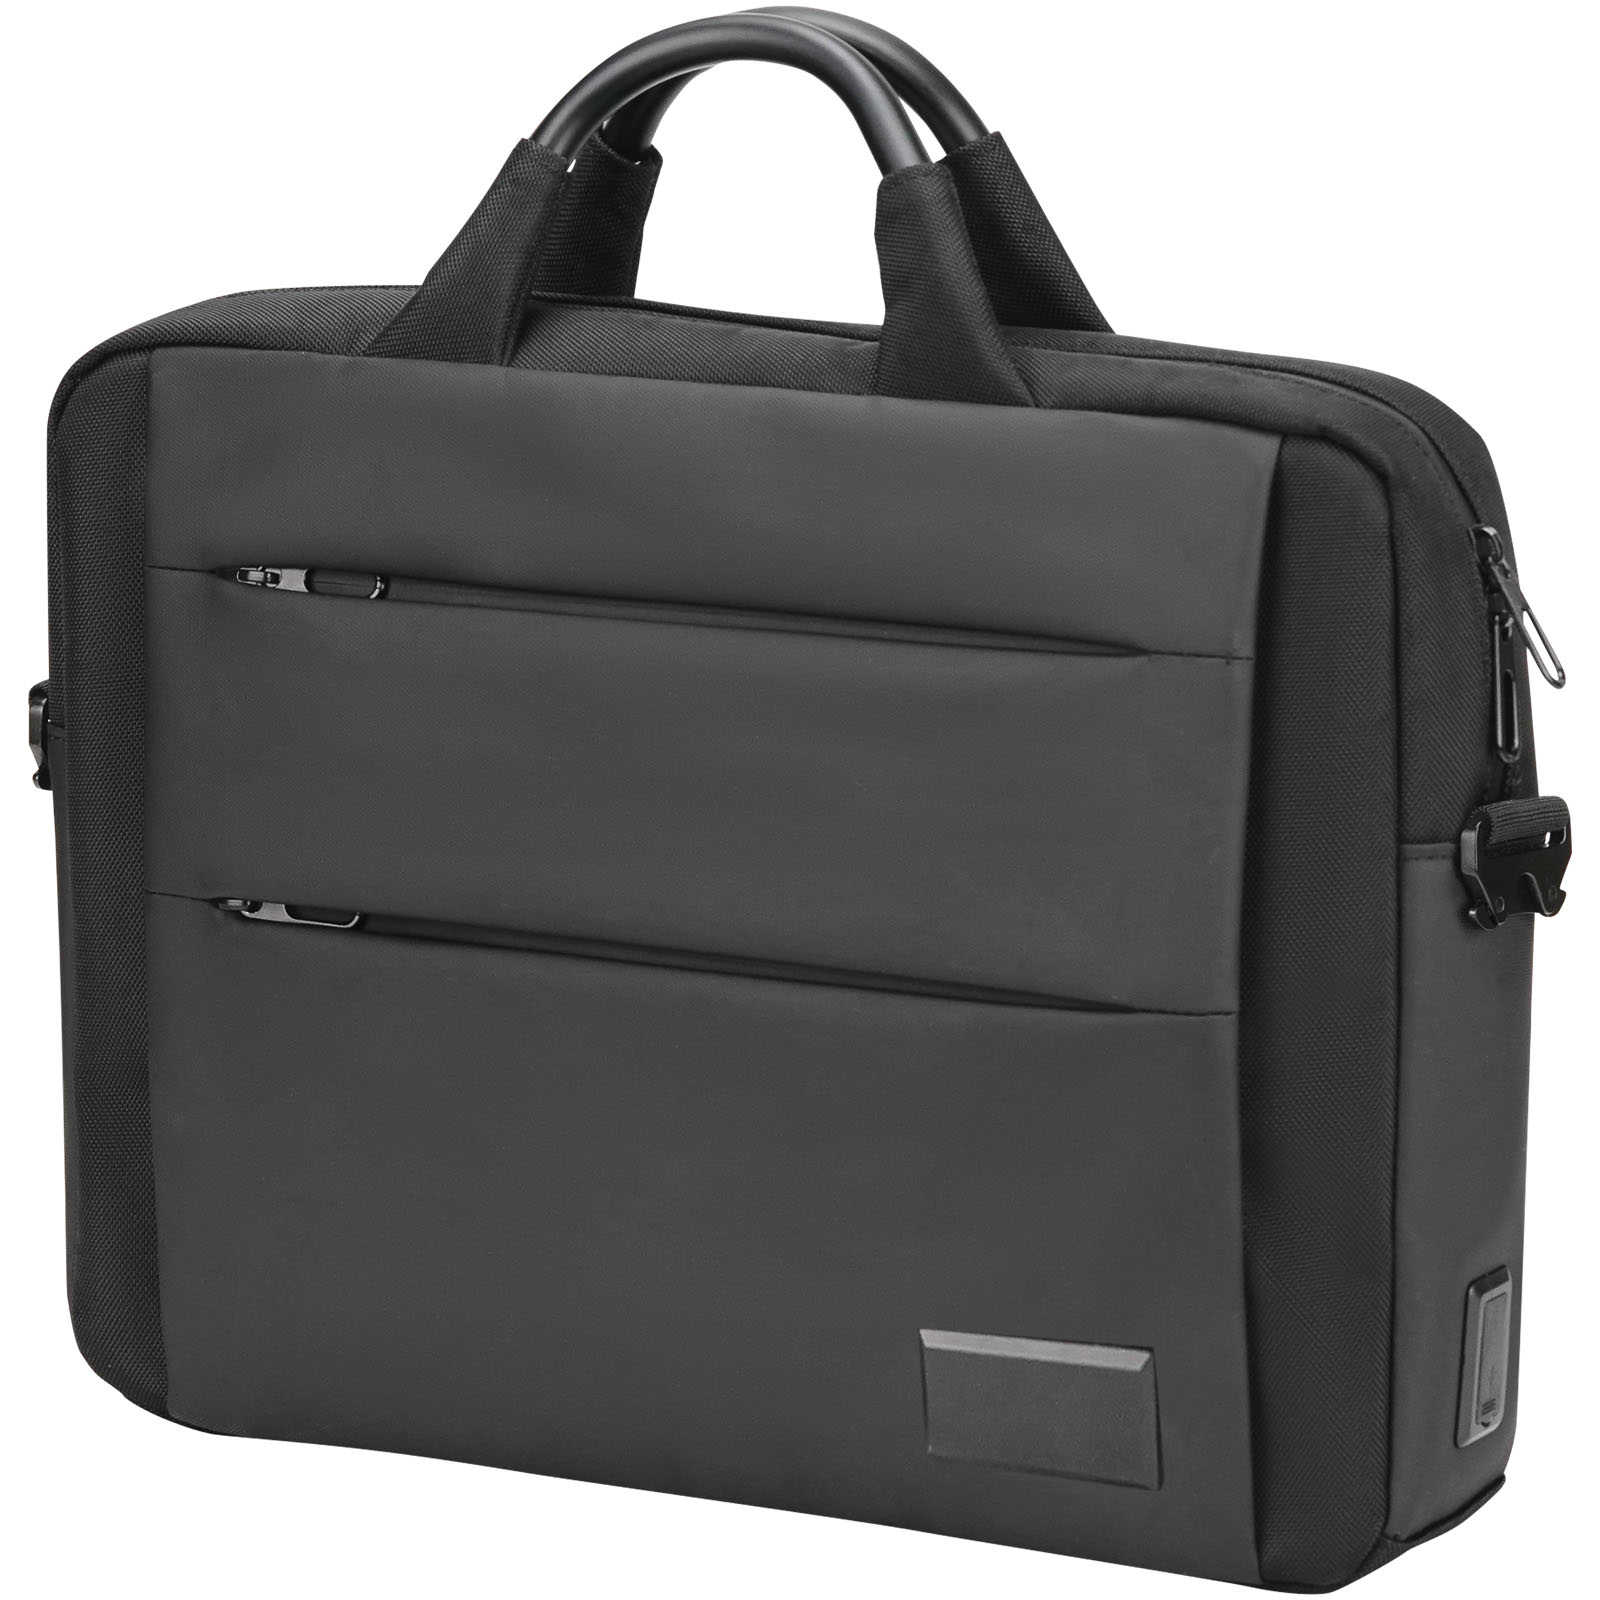 A Braunston briefcase featuring intelligent charging facilities. - Devizes